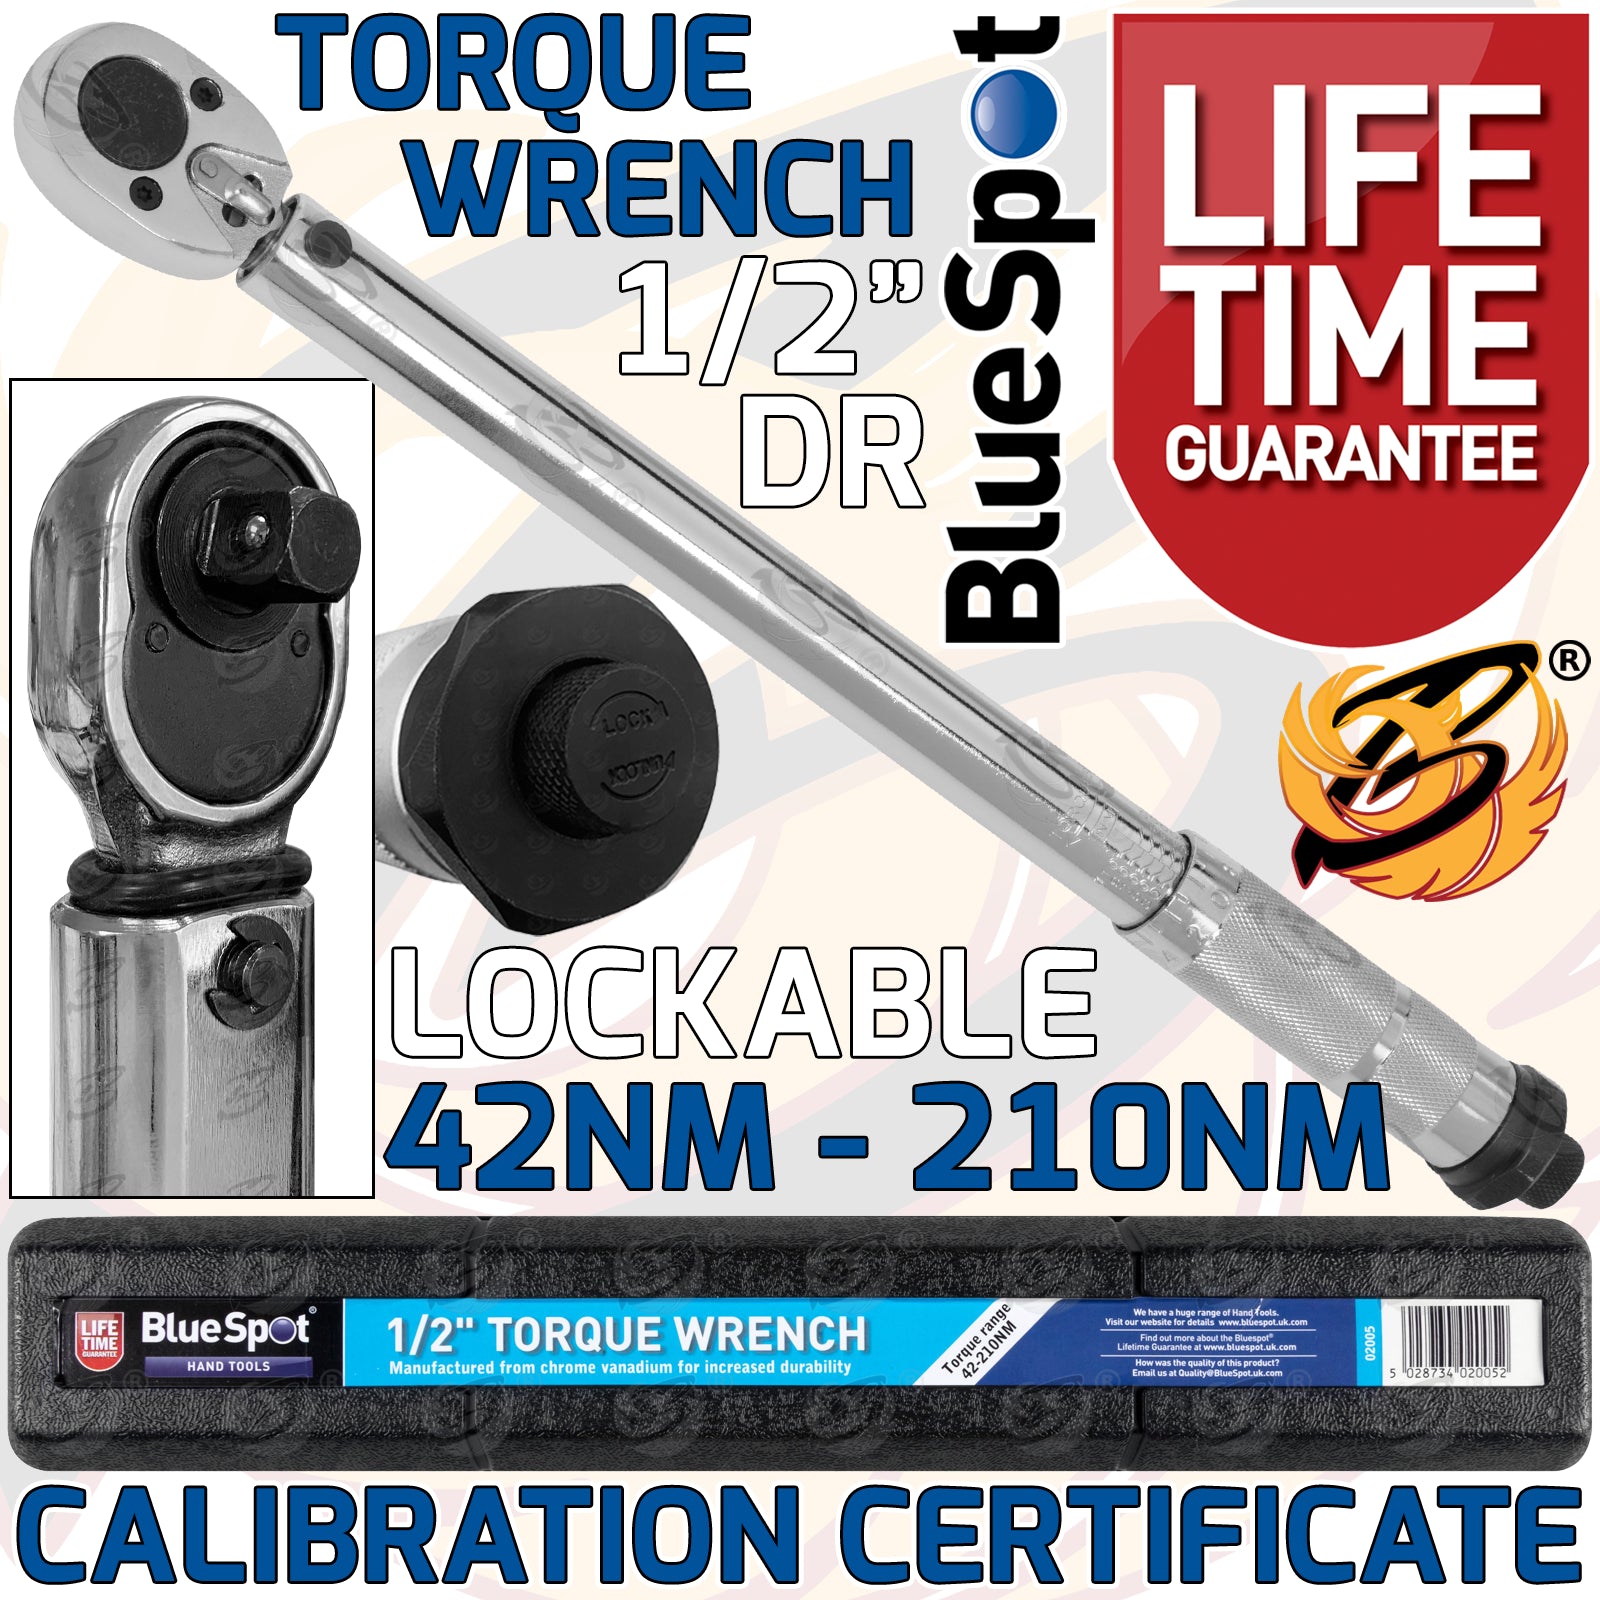 BLUESPOT 1/2" DRIVE CALIBRATED TORQUE WRENCH 42Nm - 210Nm